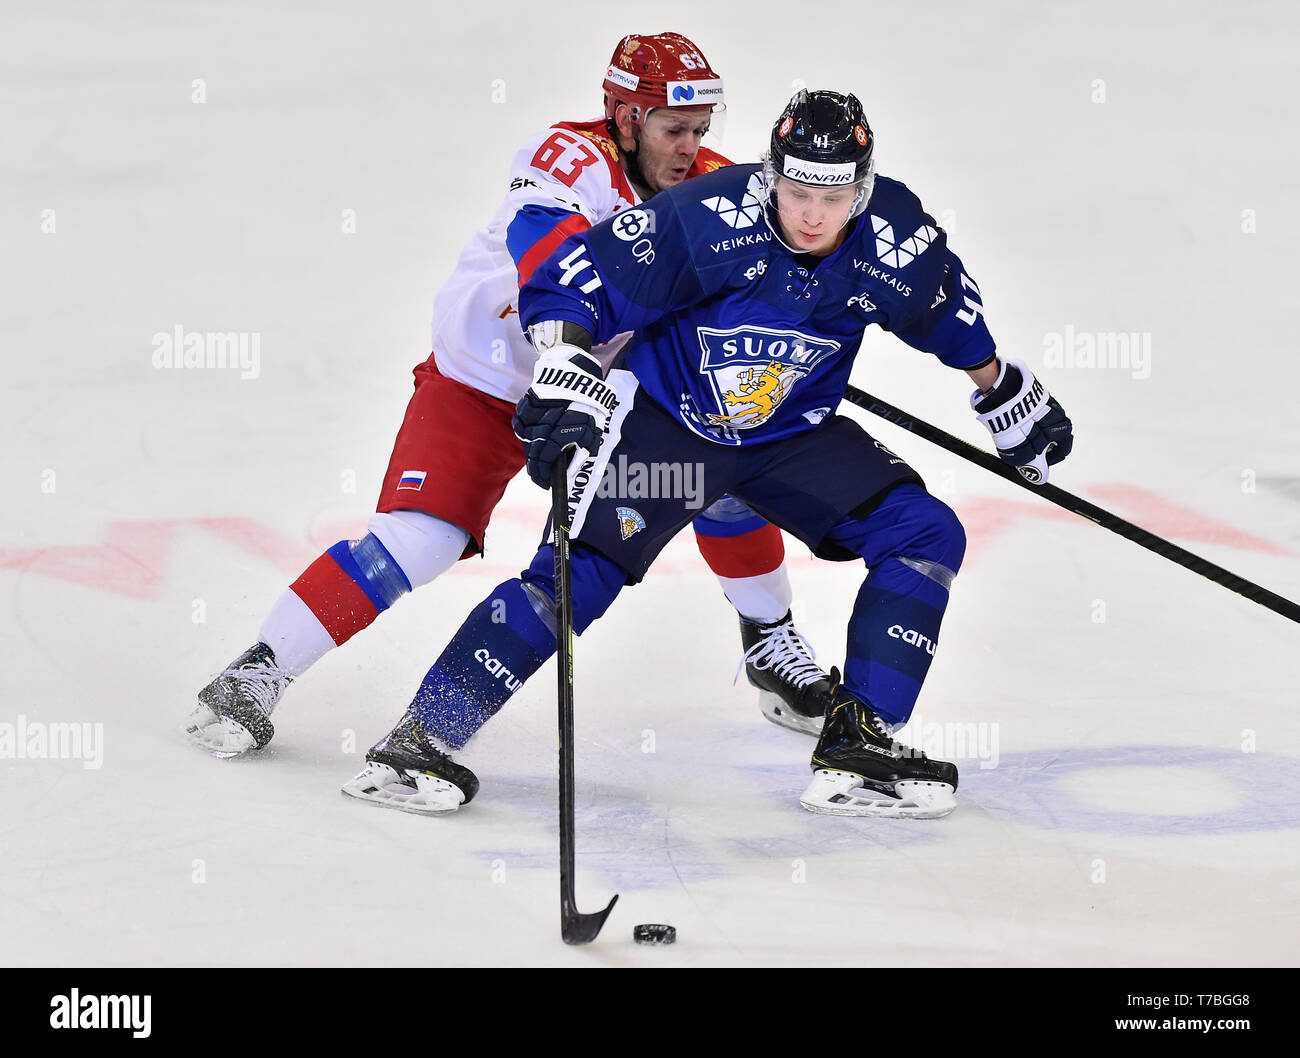 Brno, Czech Republic. 04th May, 2019. L-R Yevgeni Dadonov (RUS) and Joel Kivirant (FIN) in action during the Russia vs Finland match within Carlson Hockey Games tournament, part of Euro Hockey Tour in Brno, Czech Republic, May 4, 2019. Credit: Lubos Pavlicek/CTK Photo/Alamy Live News Stock Photo